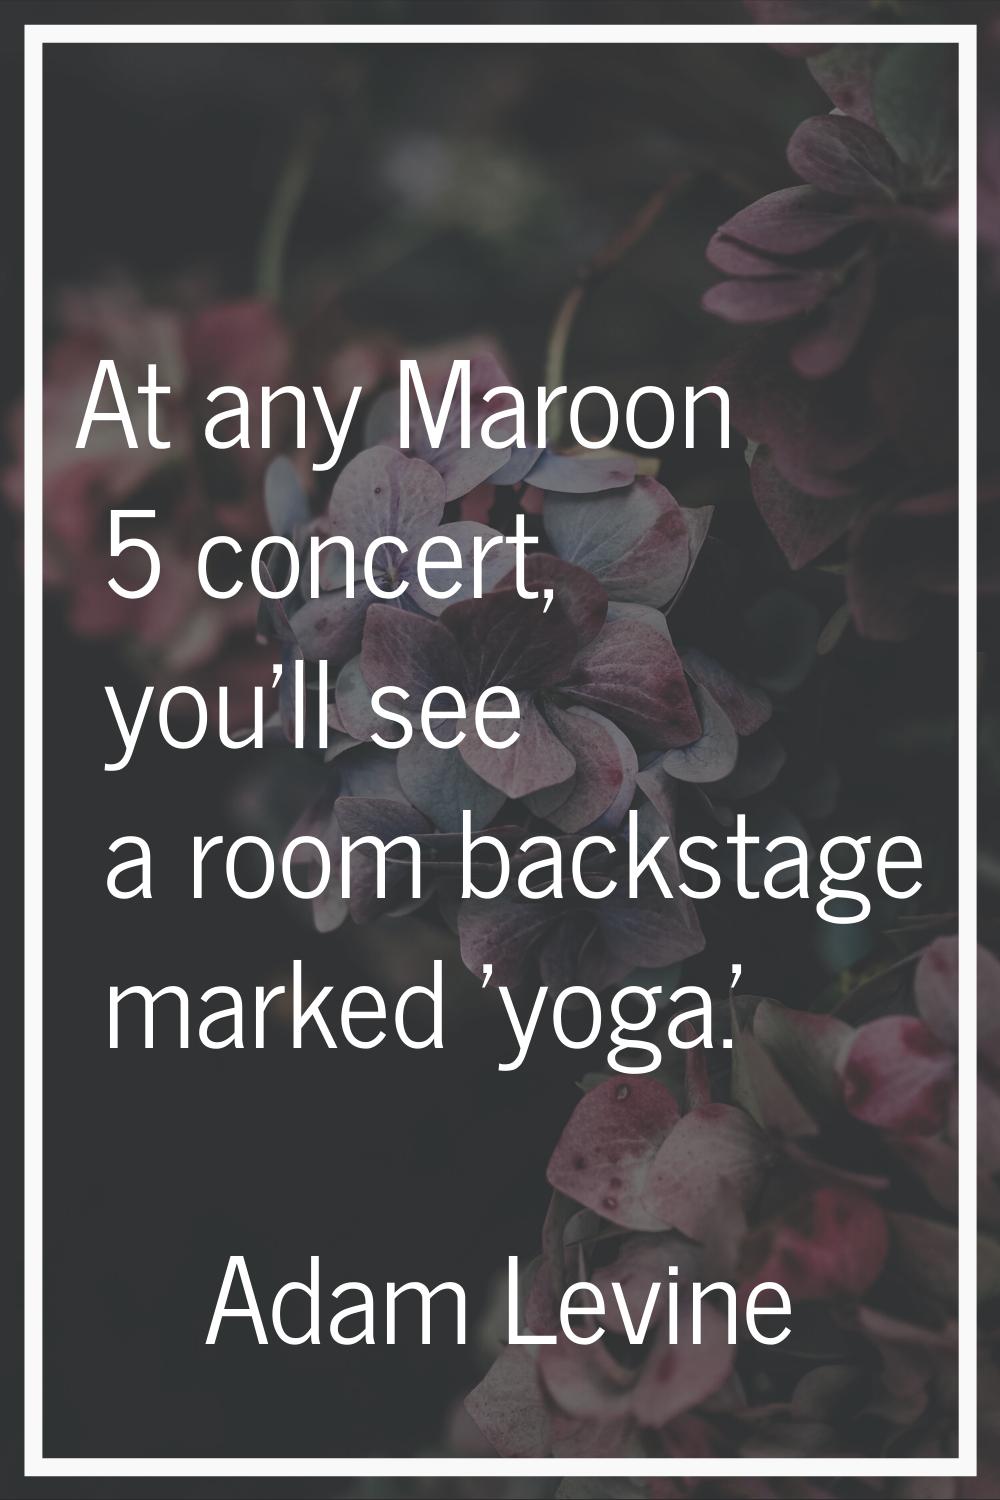 At any Maroon 5 concert, you'll see a room backstage marked 'yoga.'